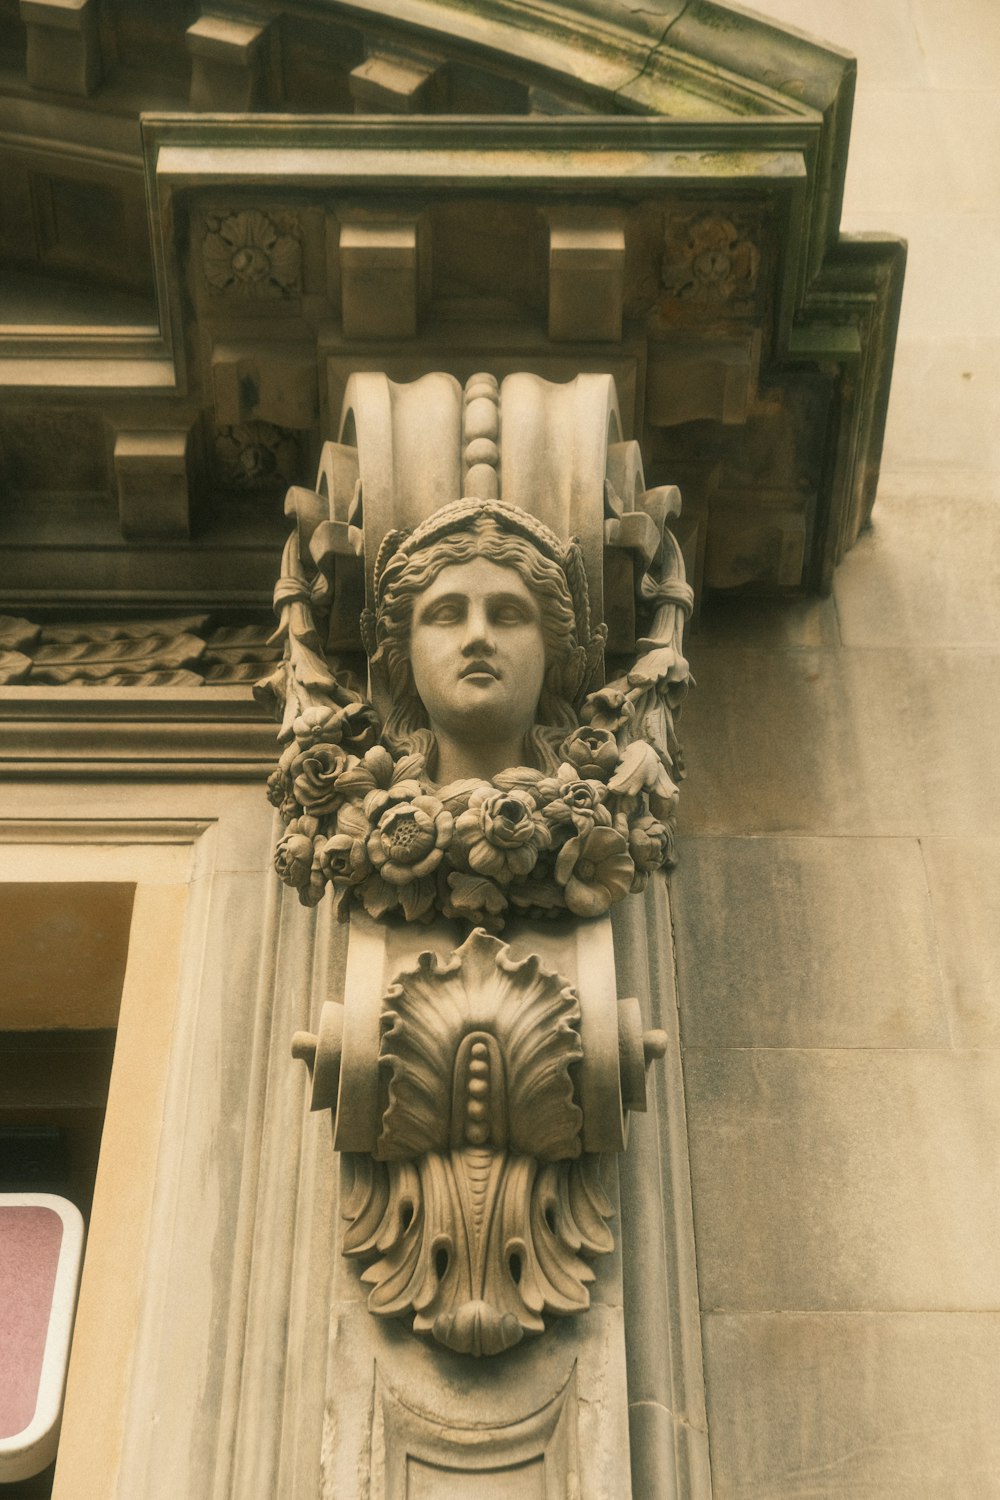 a statue of a woman's head on the side of a building